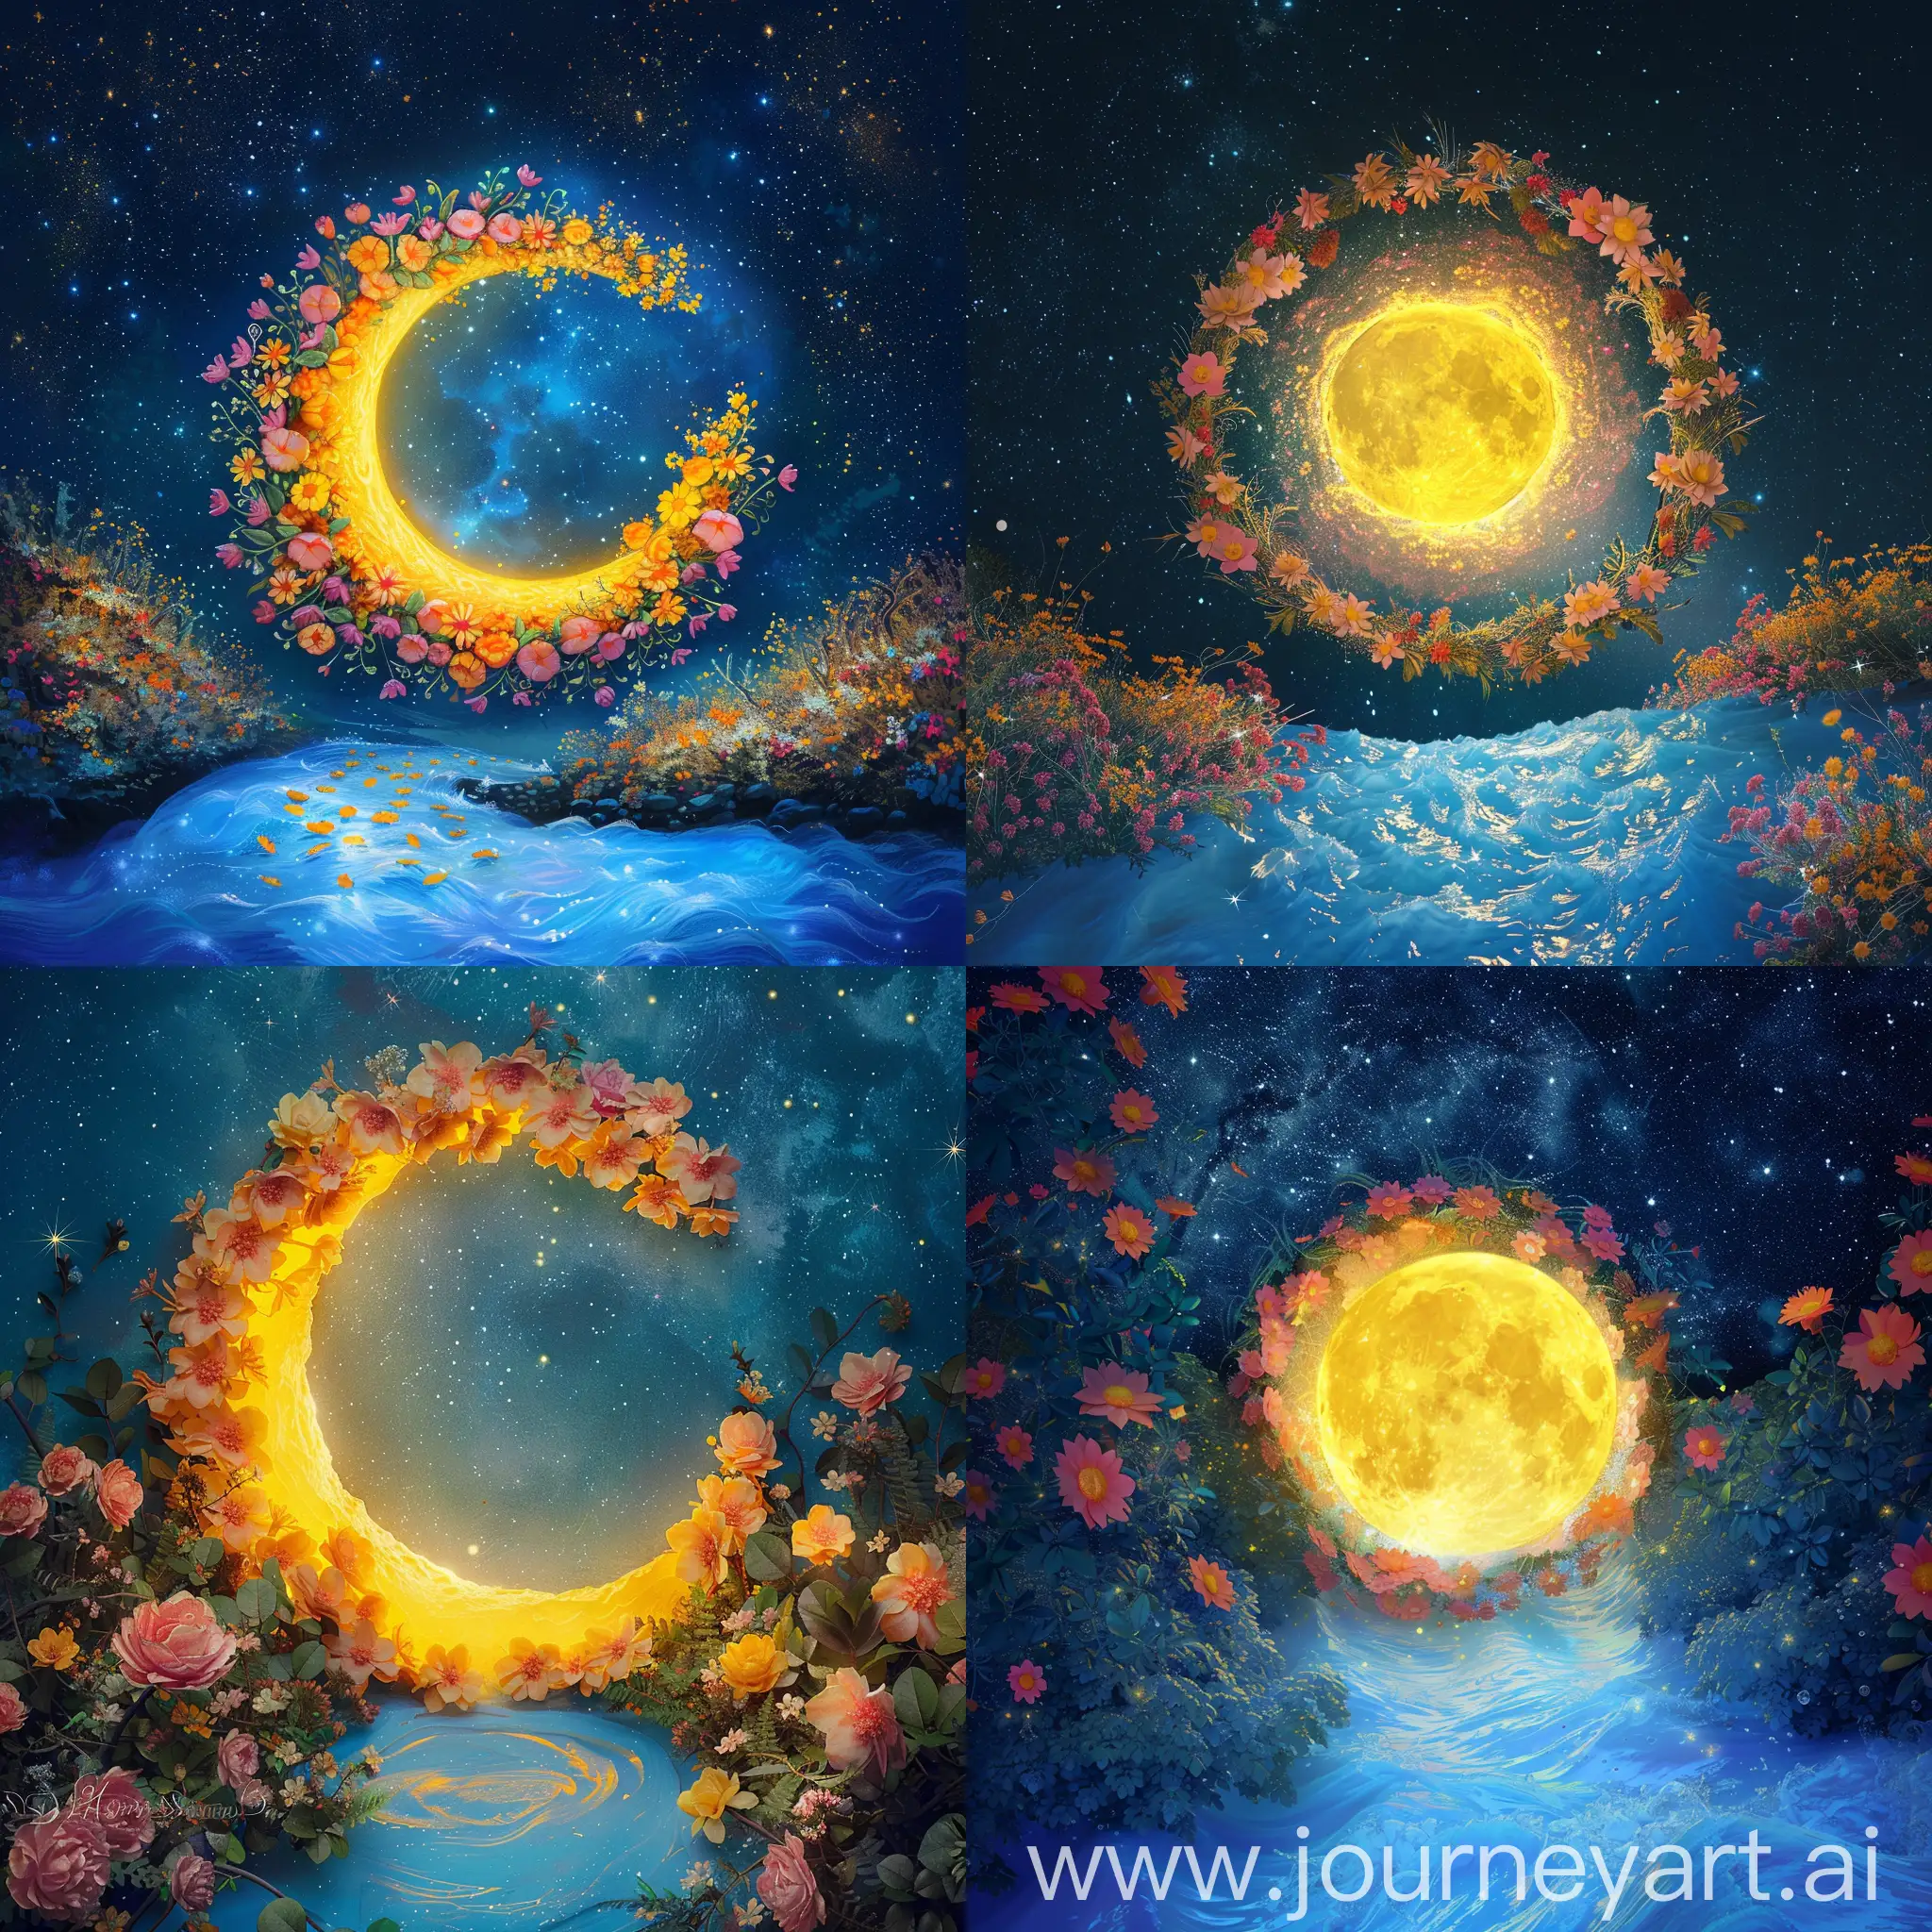 Moonlit-Night-with-Glowing-Moon-and-Floral-Wreath-Reflections